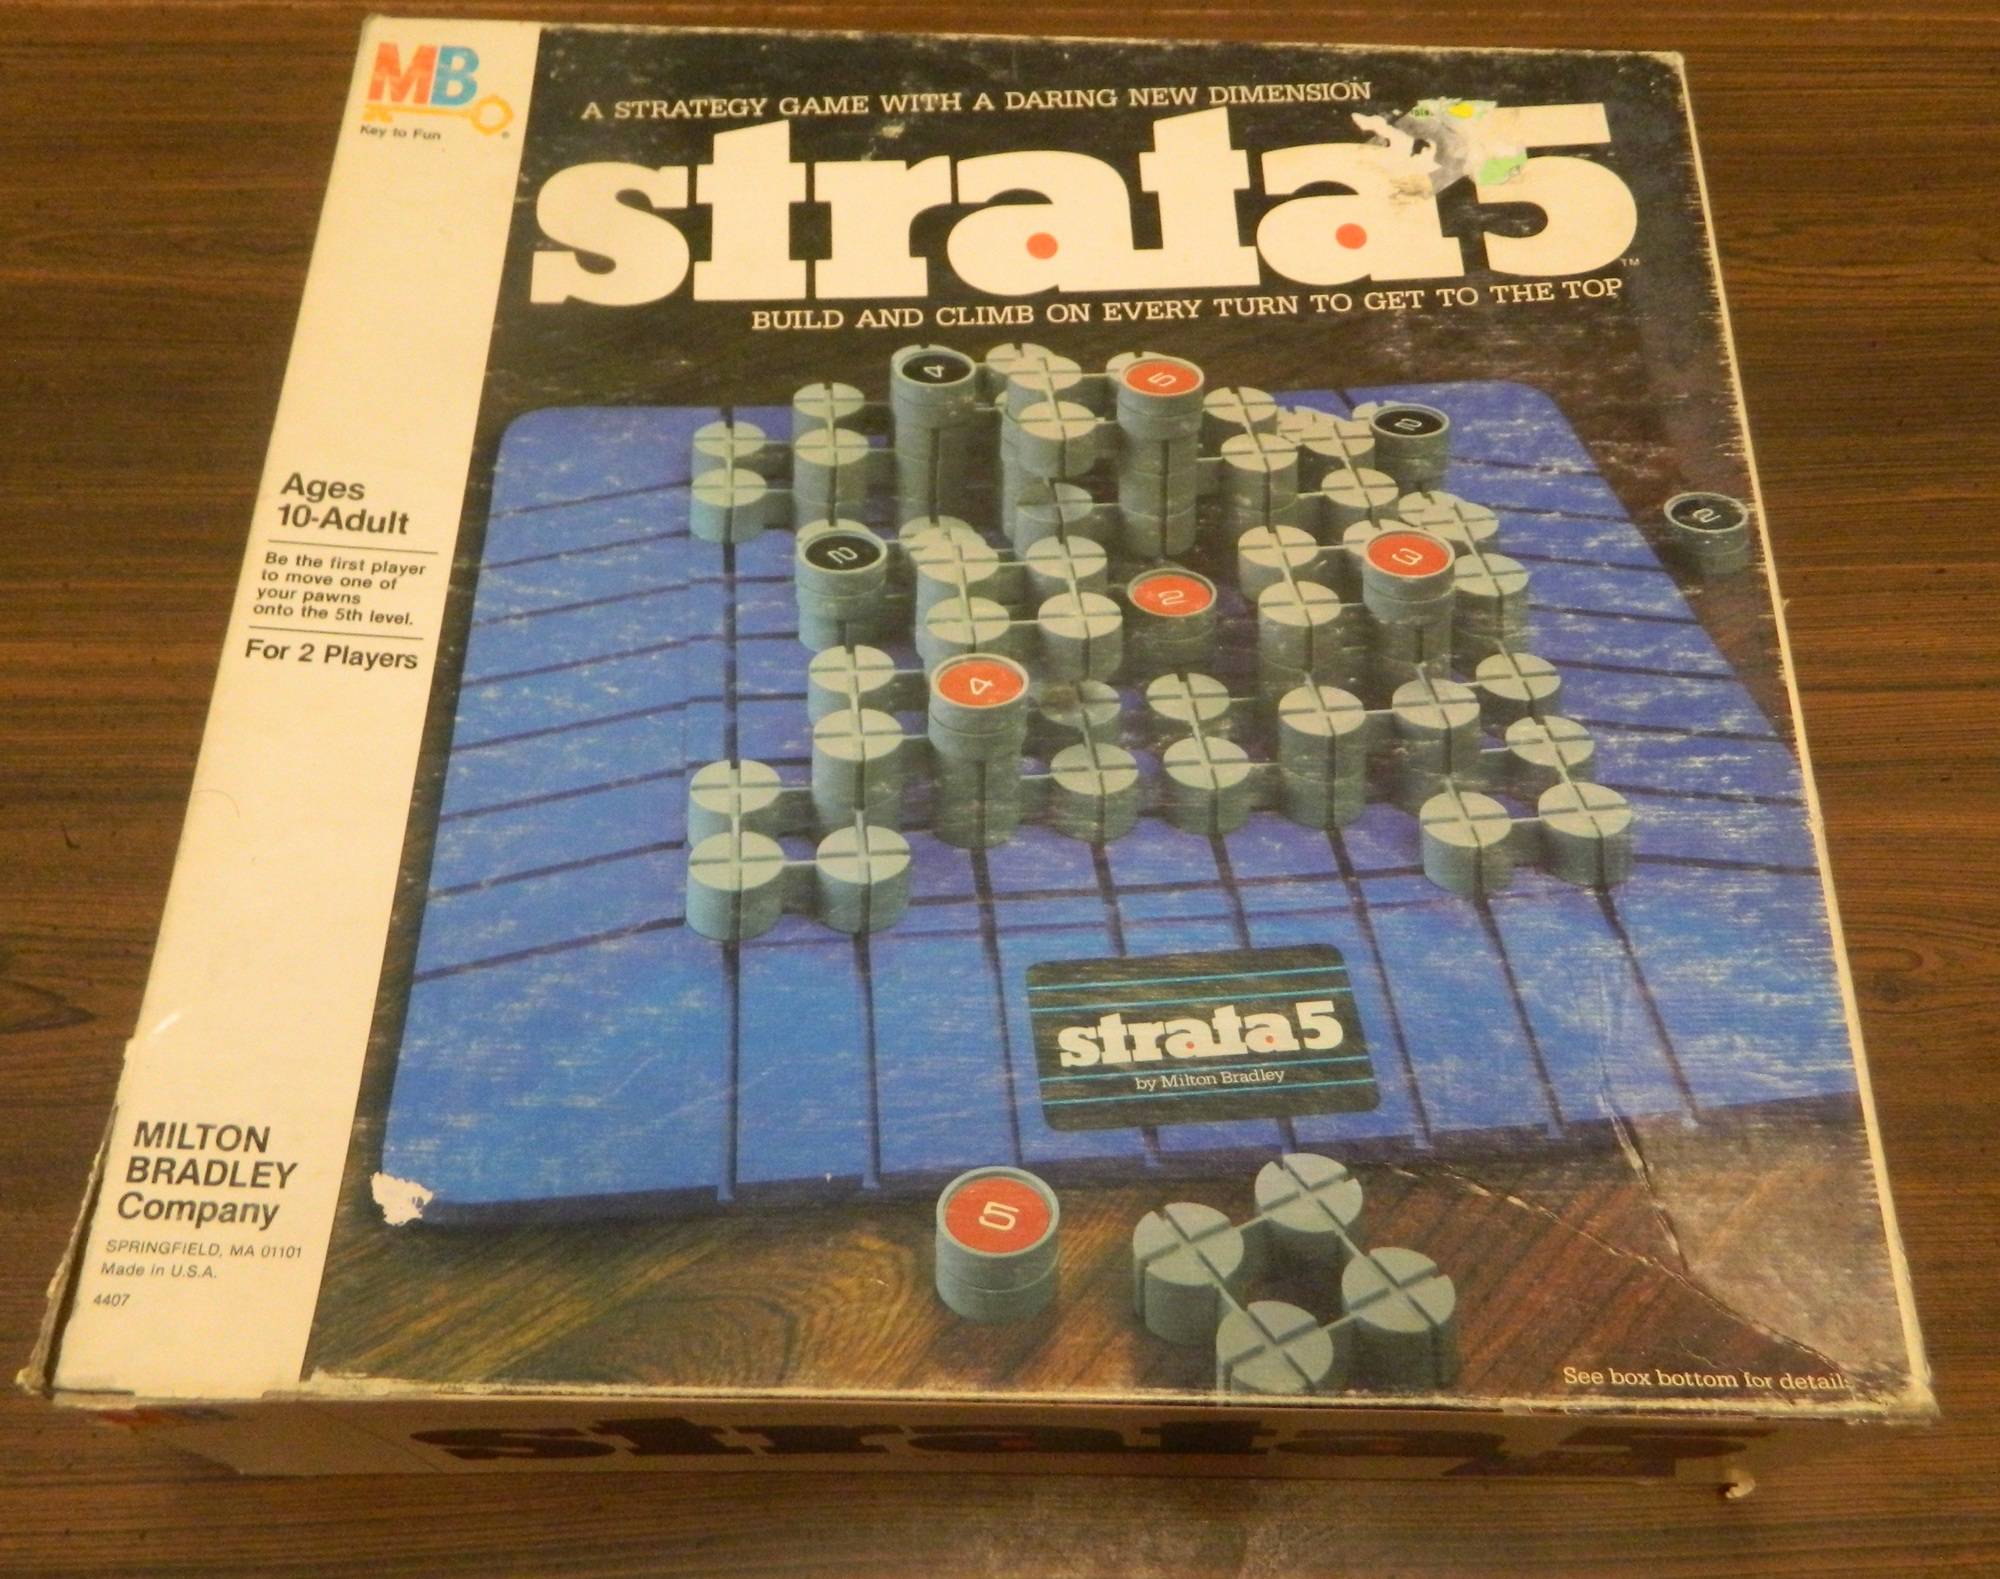 Strata 5 Board Game Review and Rules